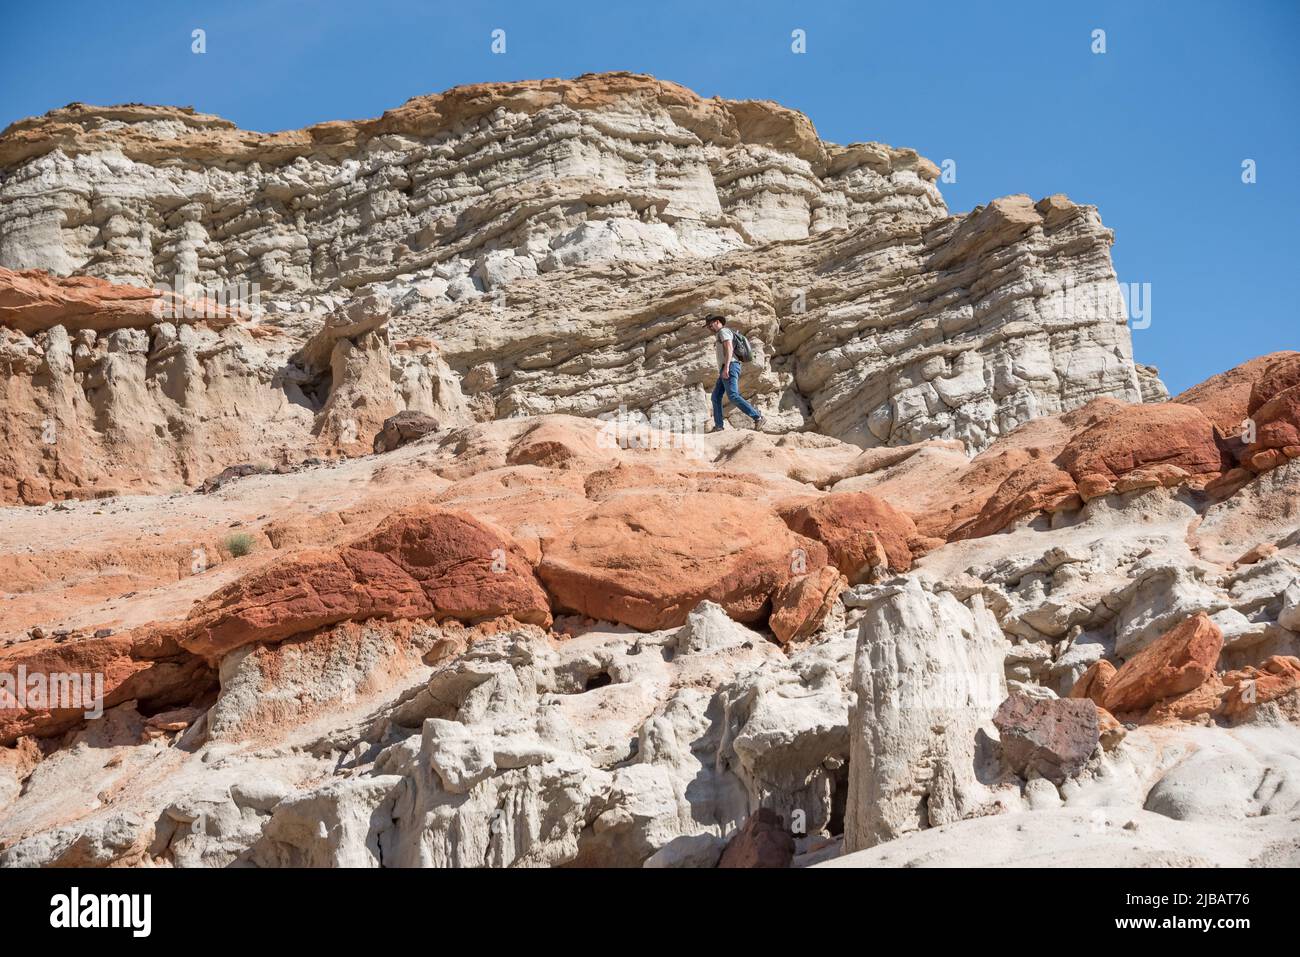 A man explores a red sandstone cliff layer in Hagen Canyon Natural Preserve at Red Rock Canyon State Park in California, a scenic desert hiking trail. Stock Photo